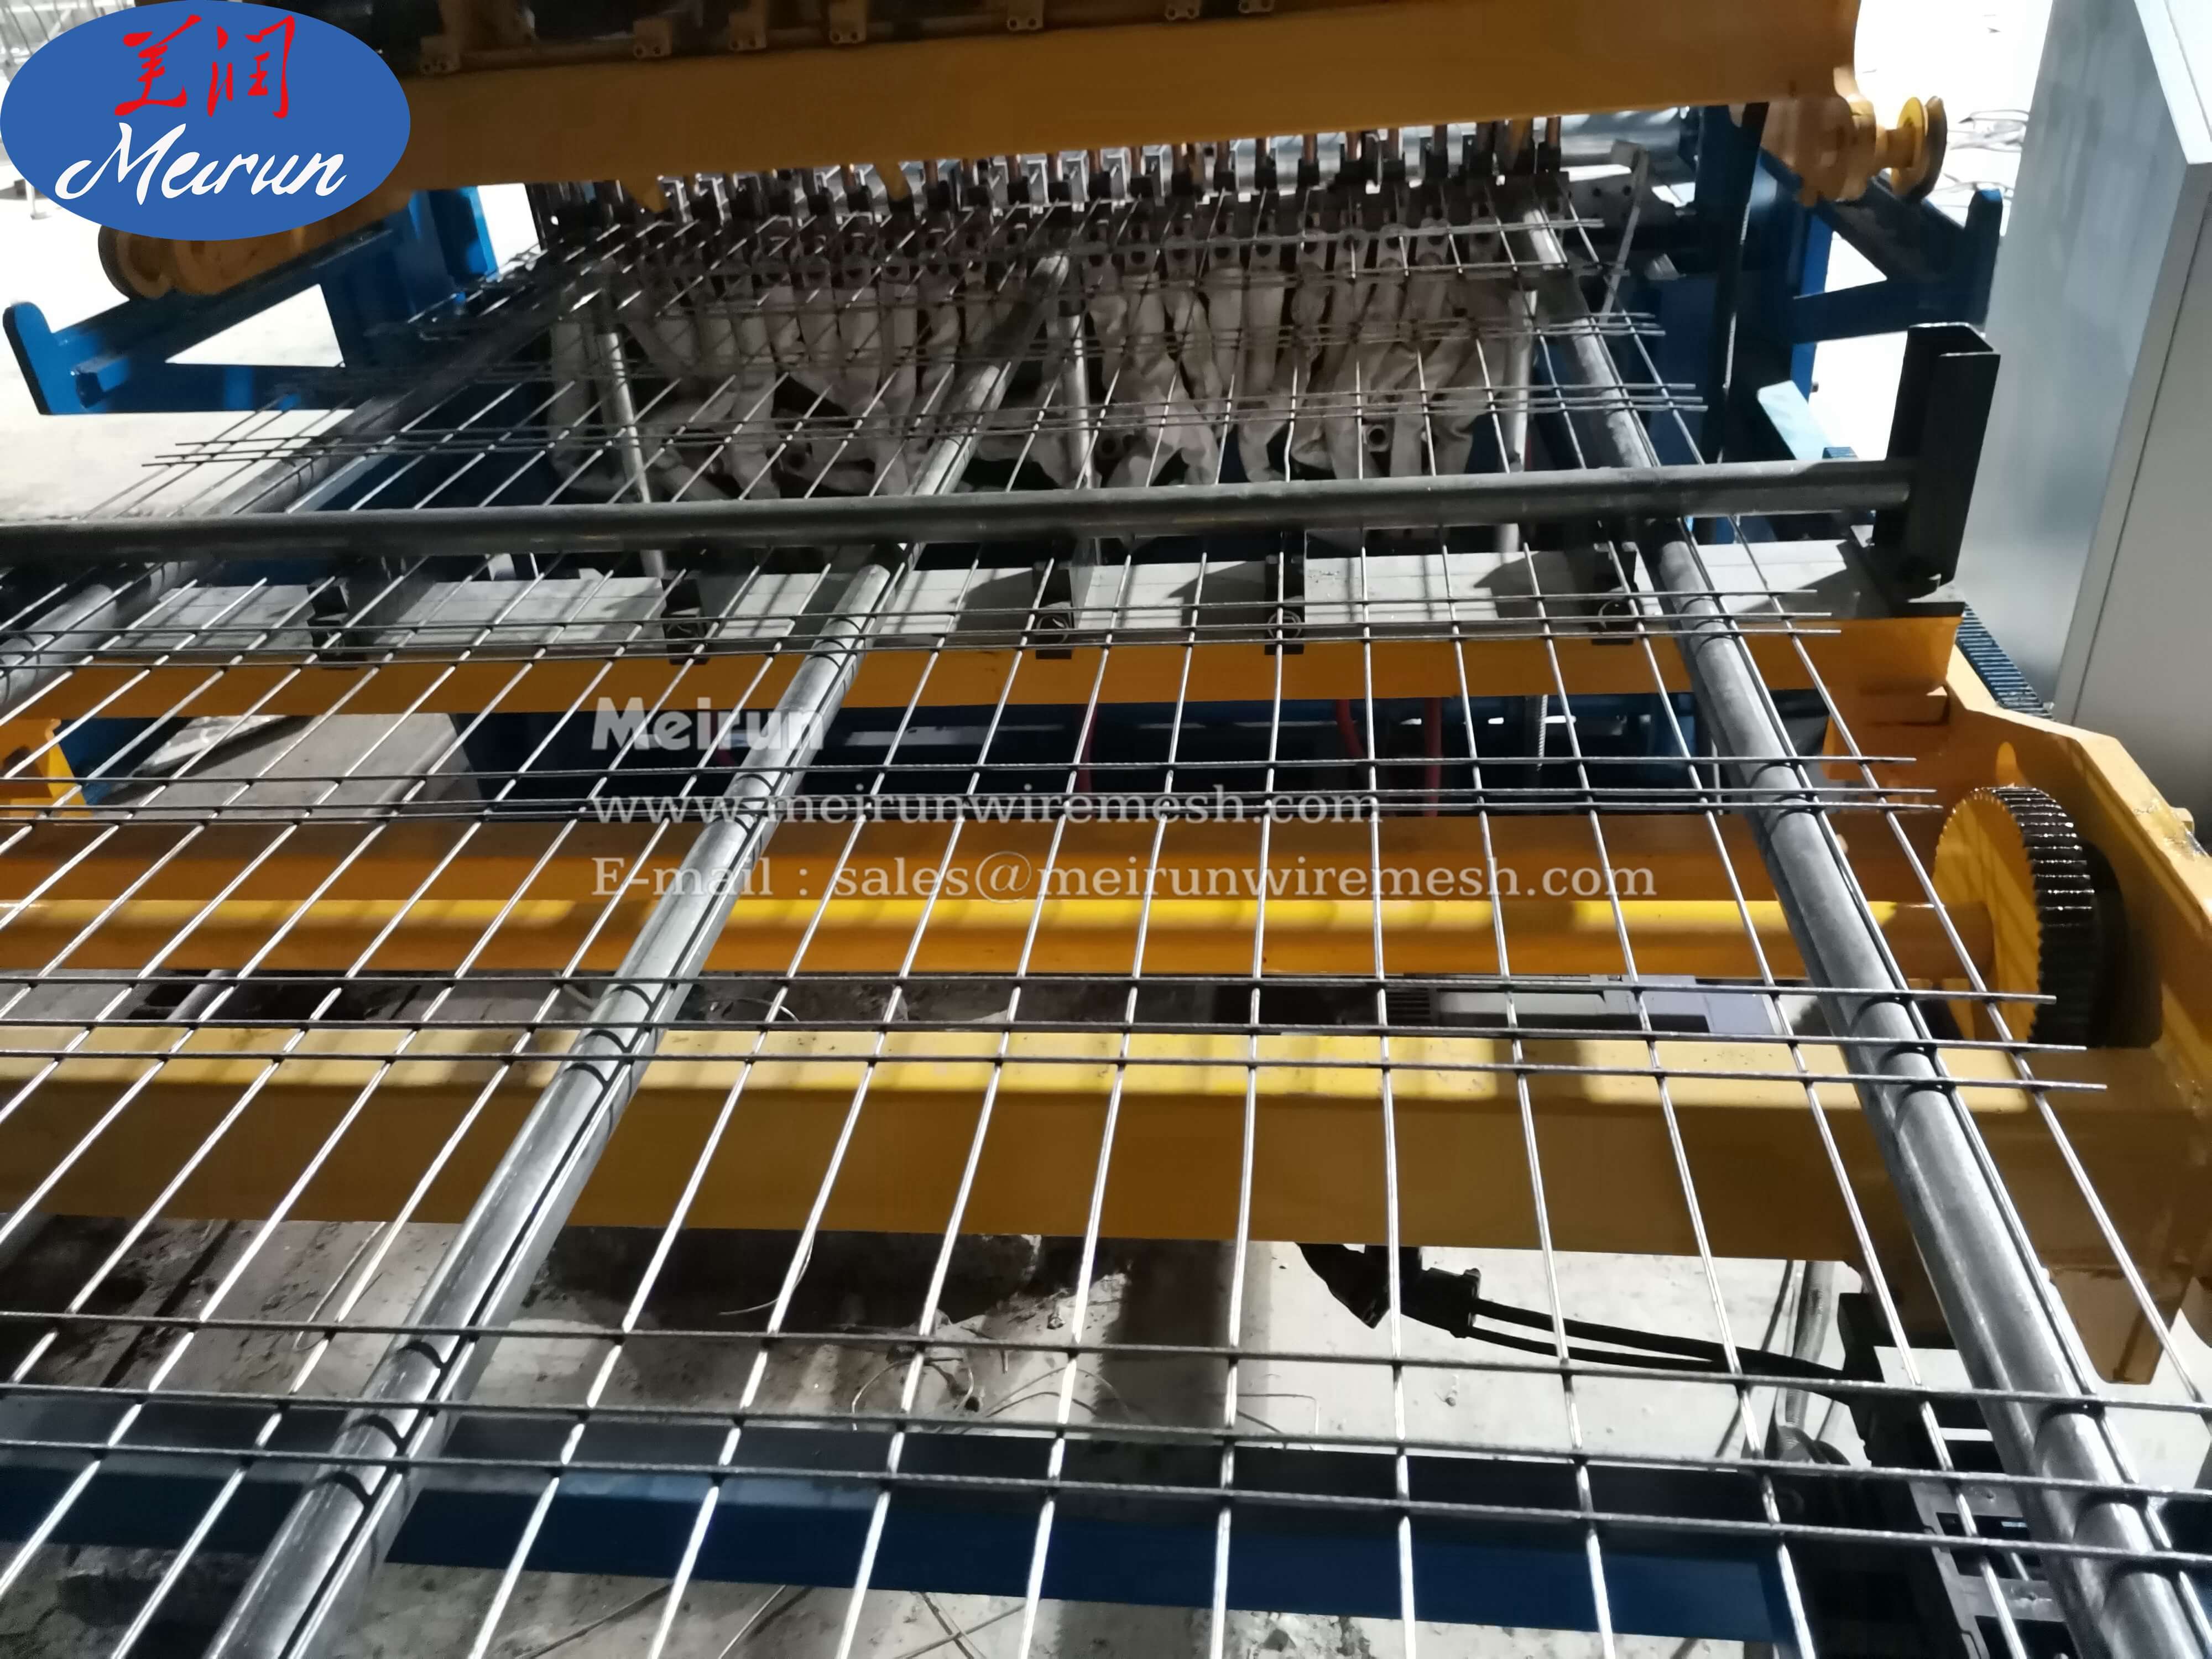 Concrete Reinforcing Welded Wire Mesh Fence Panel Machine